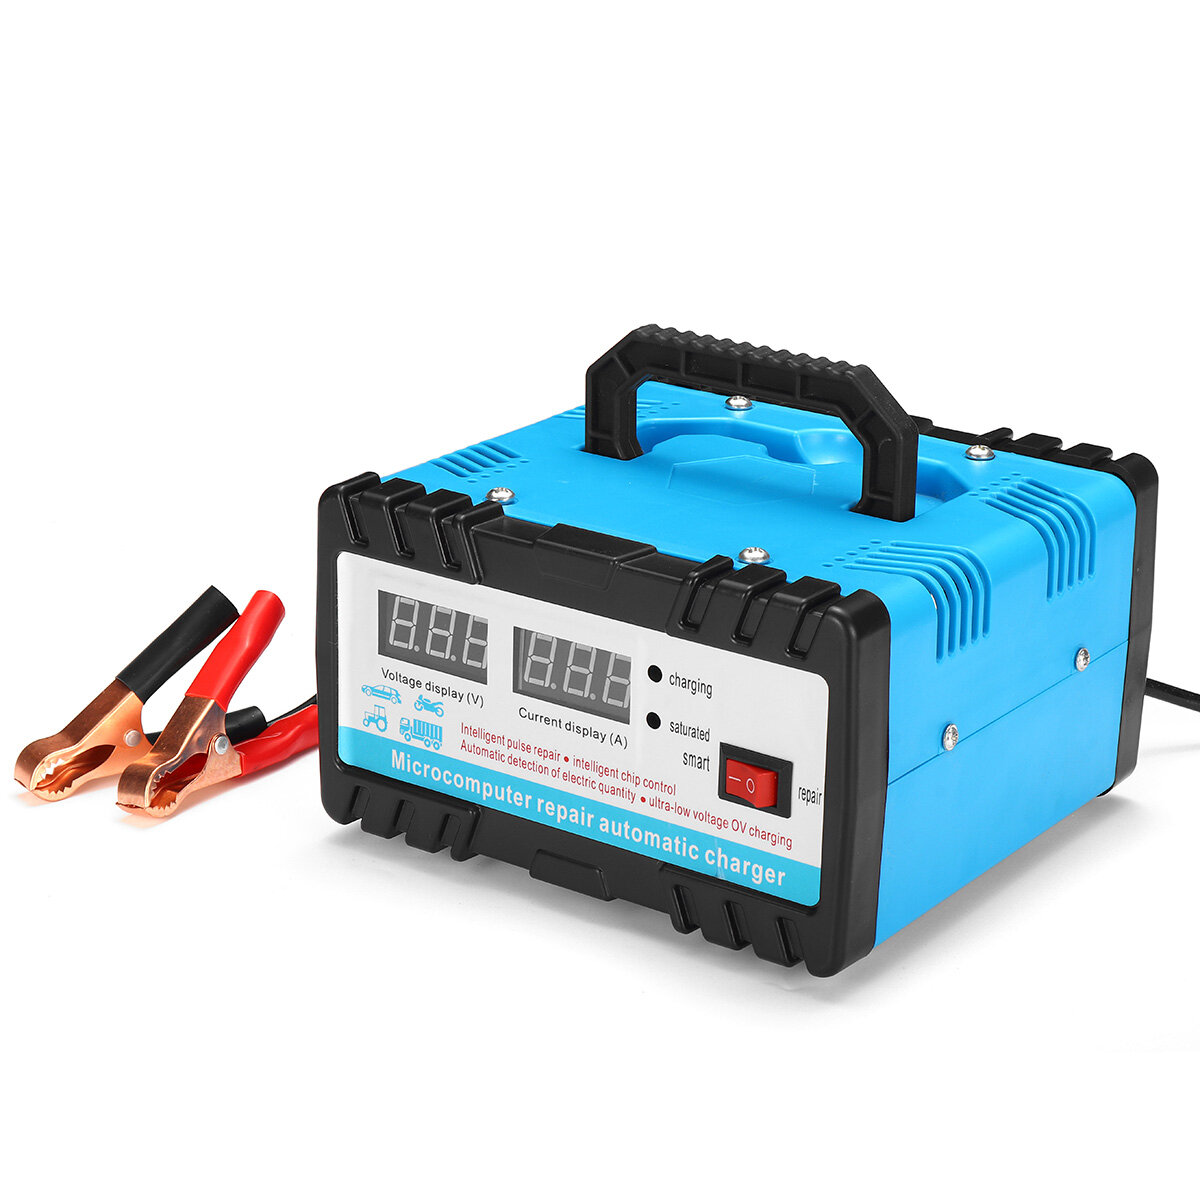 12V/24V Smart Battery Charging Equipment Automobile Motorcycle Universal Electric Car Battery Charger